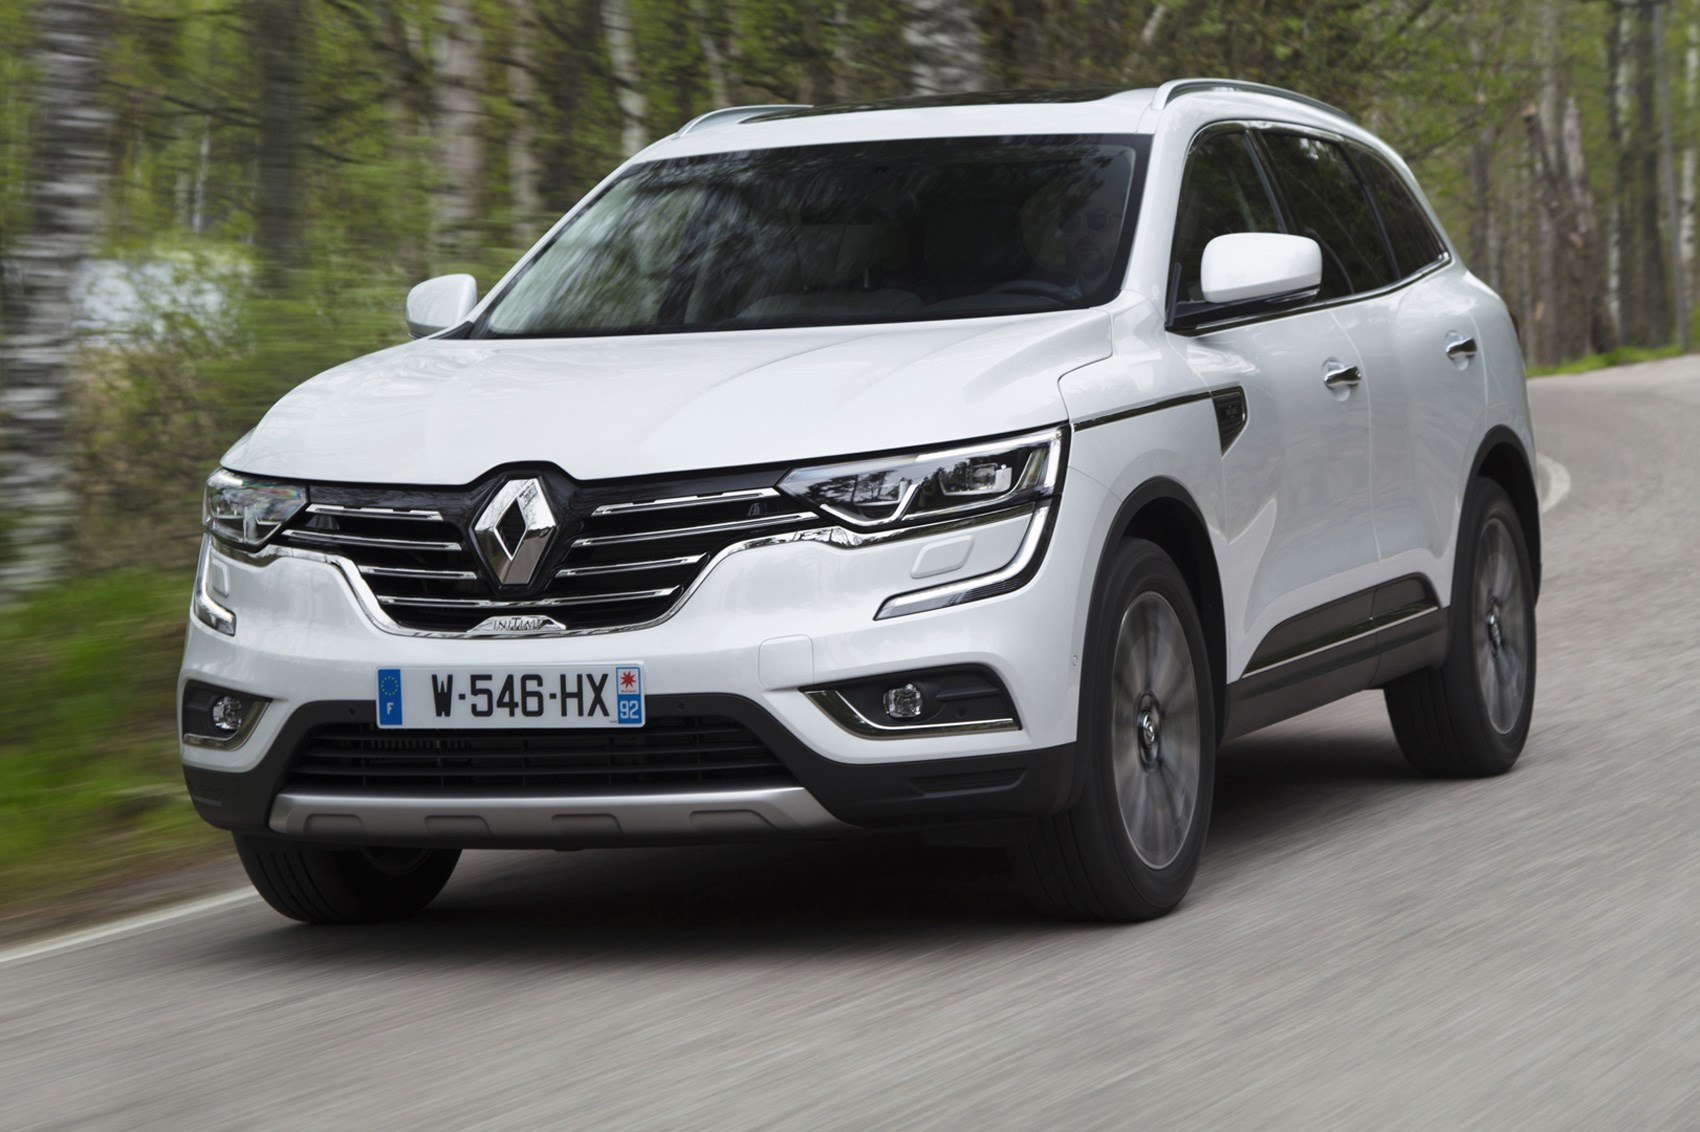 Renault Koleos 4X4 AT On Road Price (Diesel), Features & Specs, Images